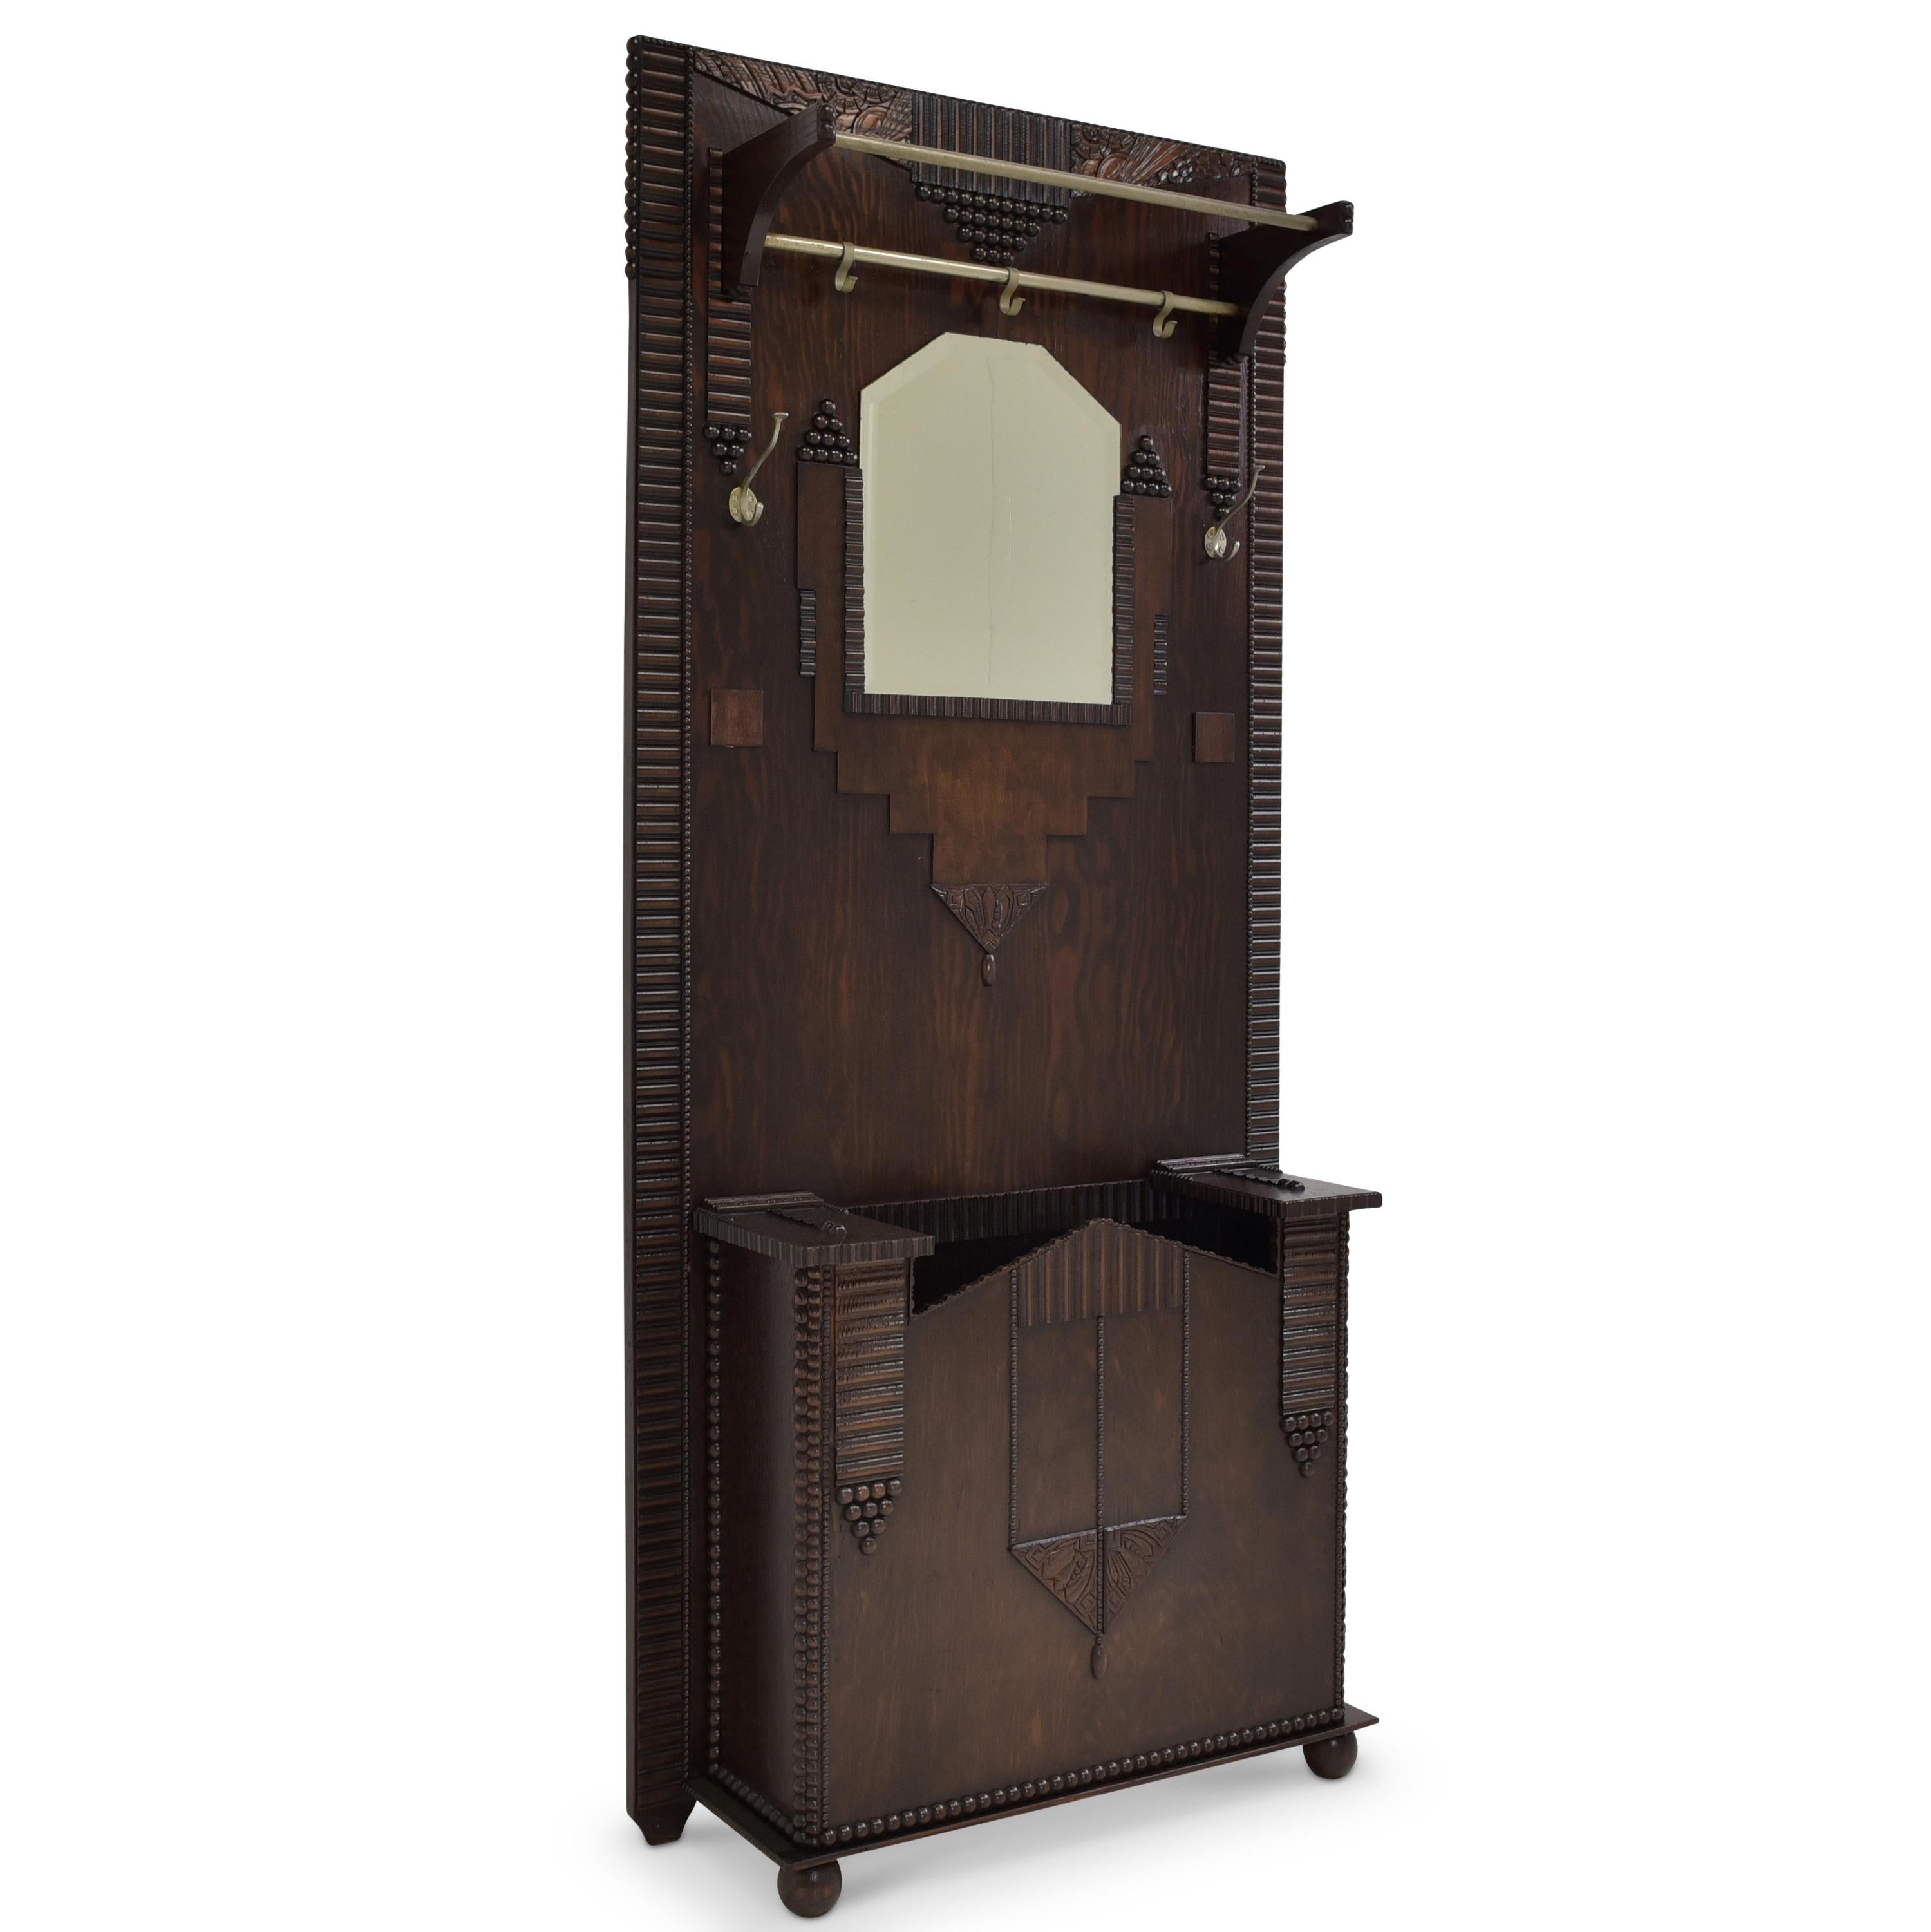 Wardrobe restored Art Deco around 1930 dark oak wall wardrobe

Features:
With rods, mirror, hook and large umbrella stand
Heavily decorated with geometric applications and abstract carvings
Original faceted mirror
Typical geometric Art Deco